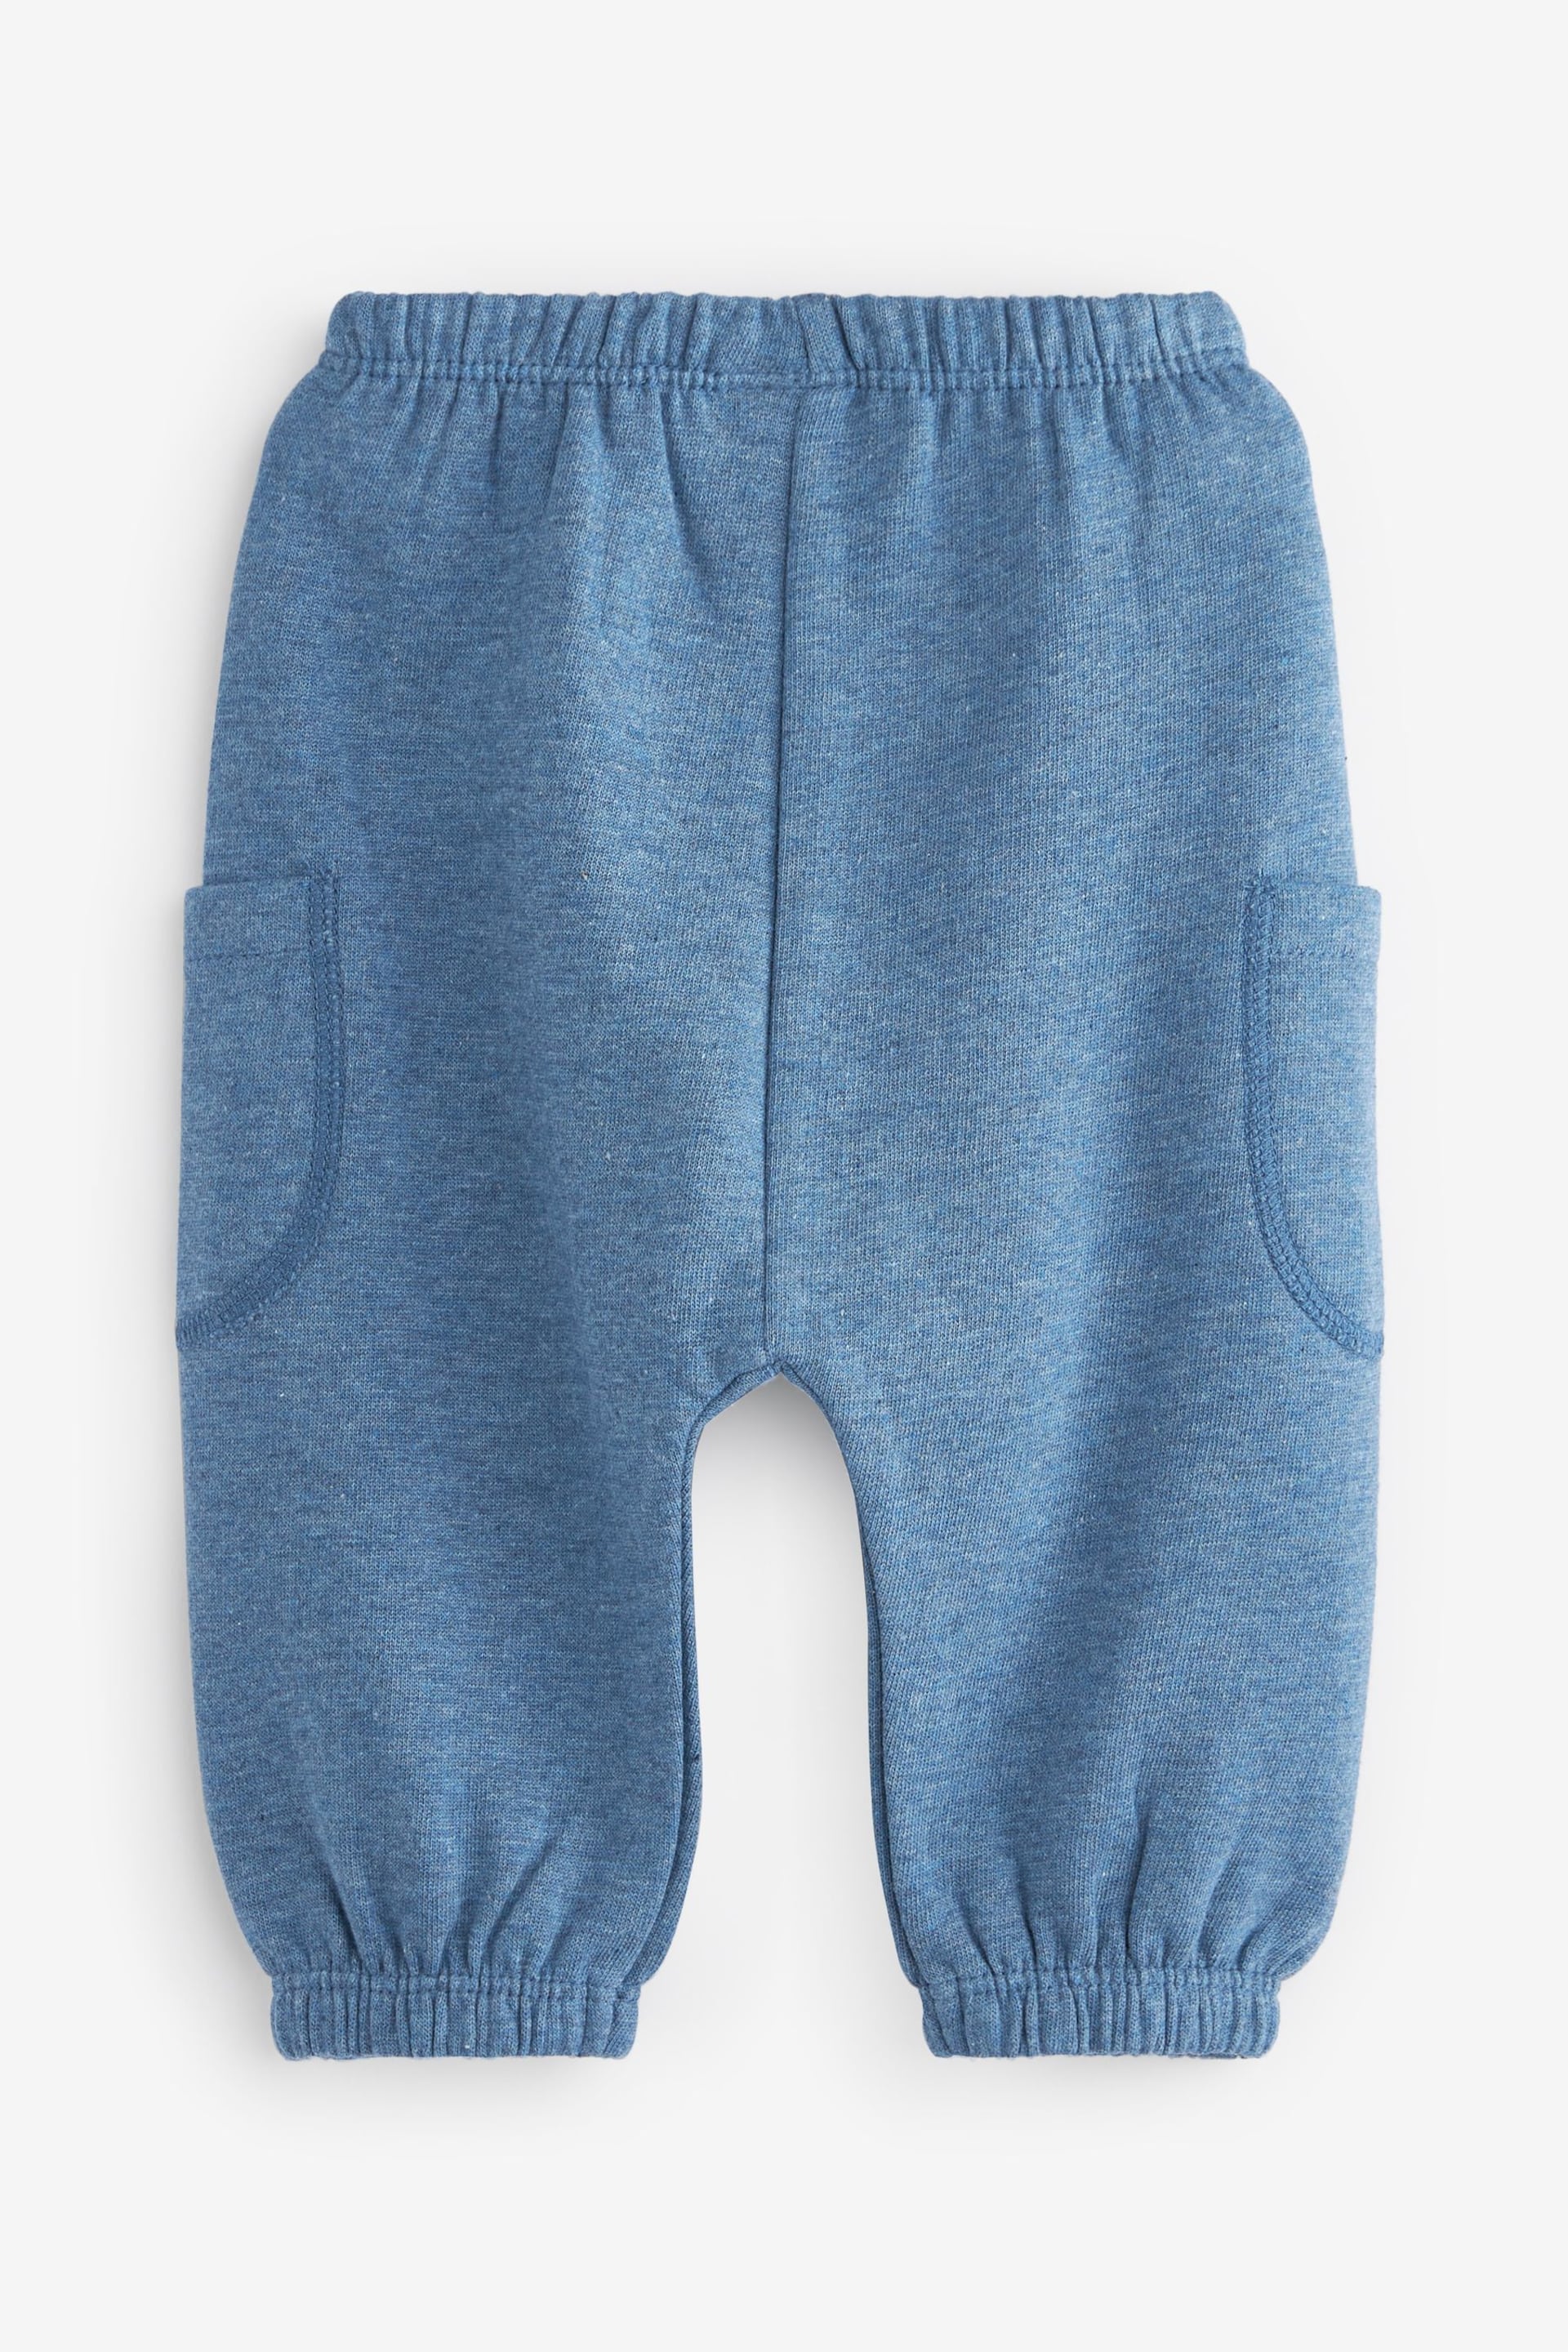 Blue/Grey Joggers 3 Pack (0mths-2yrs) - Image 2 of 2